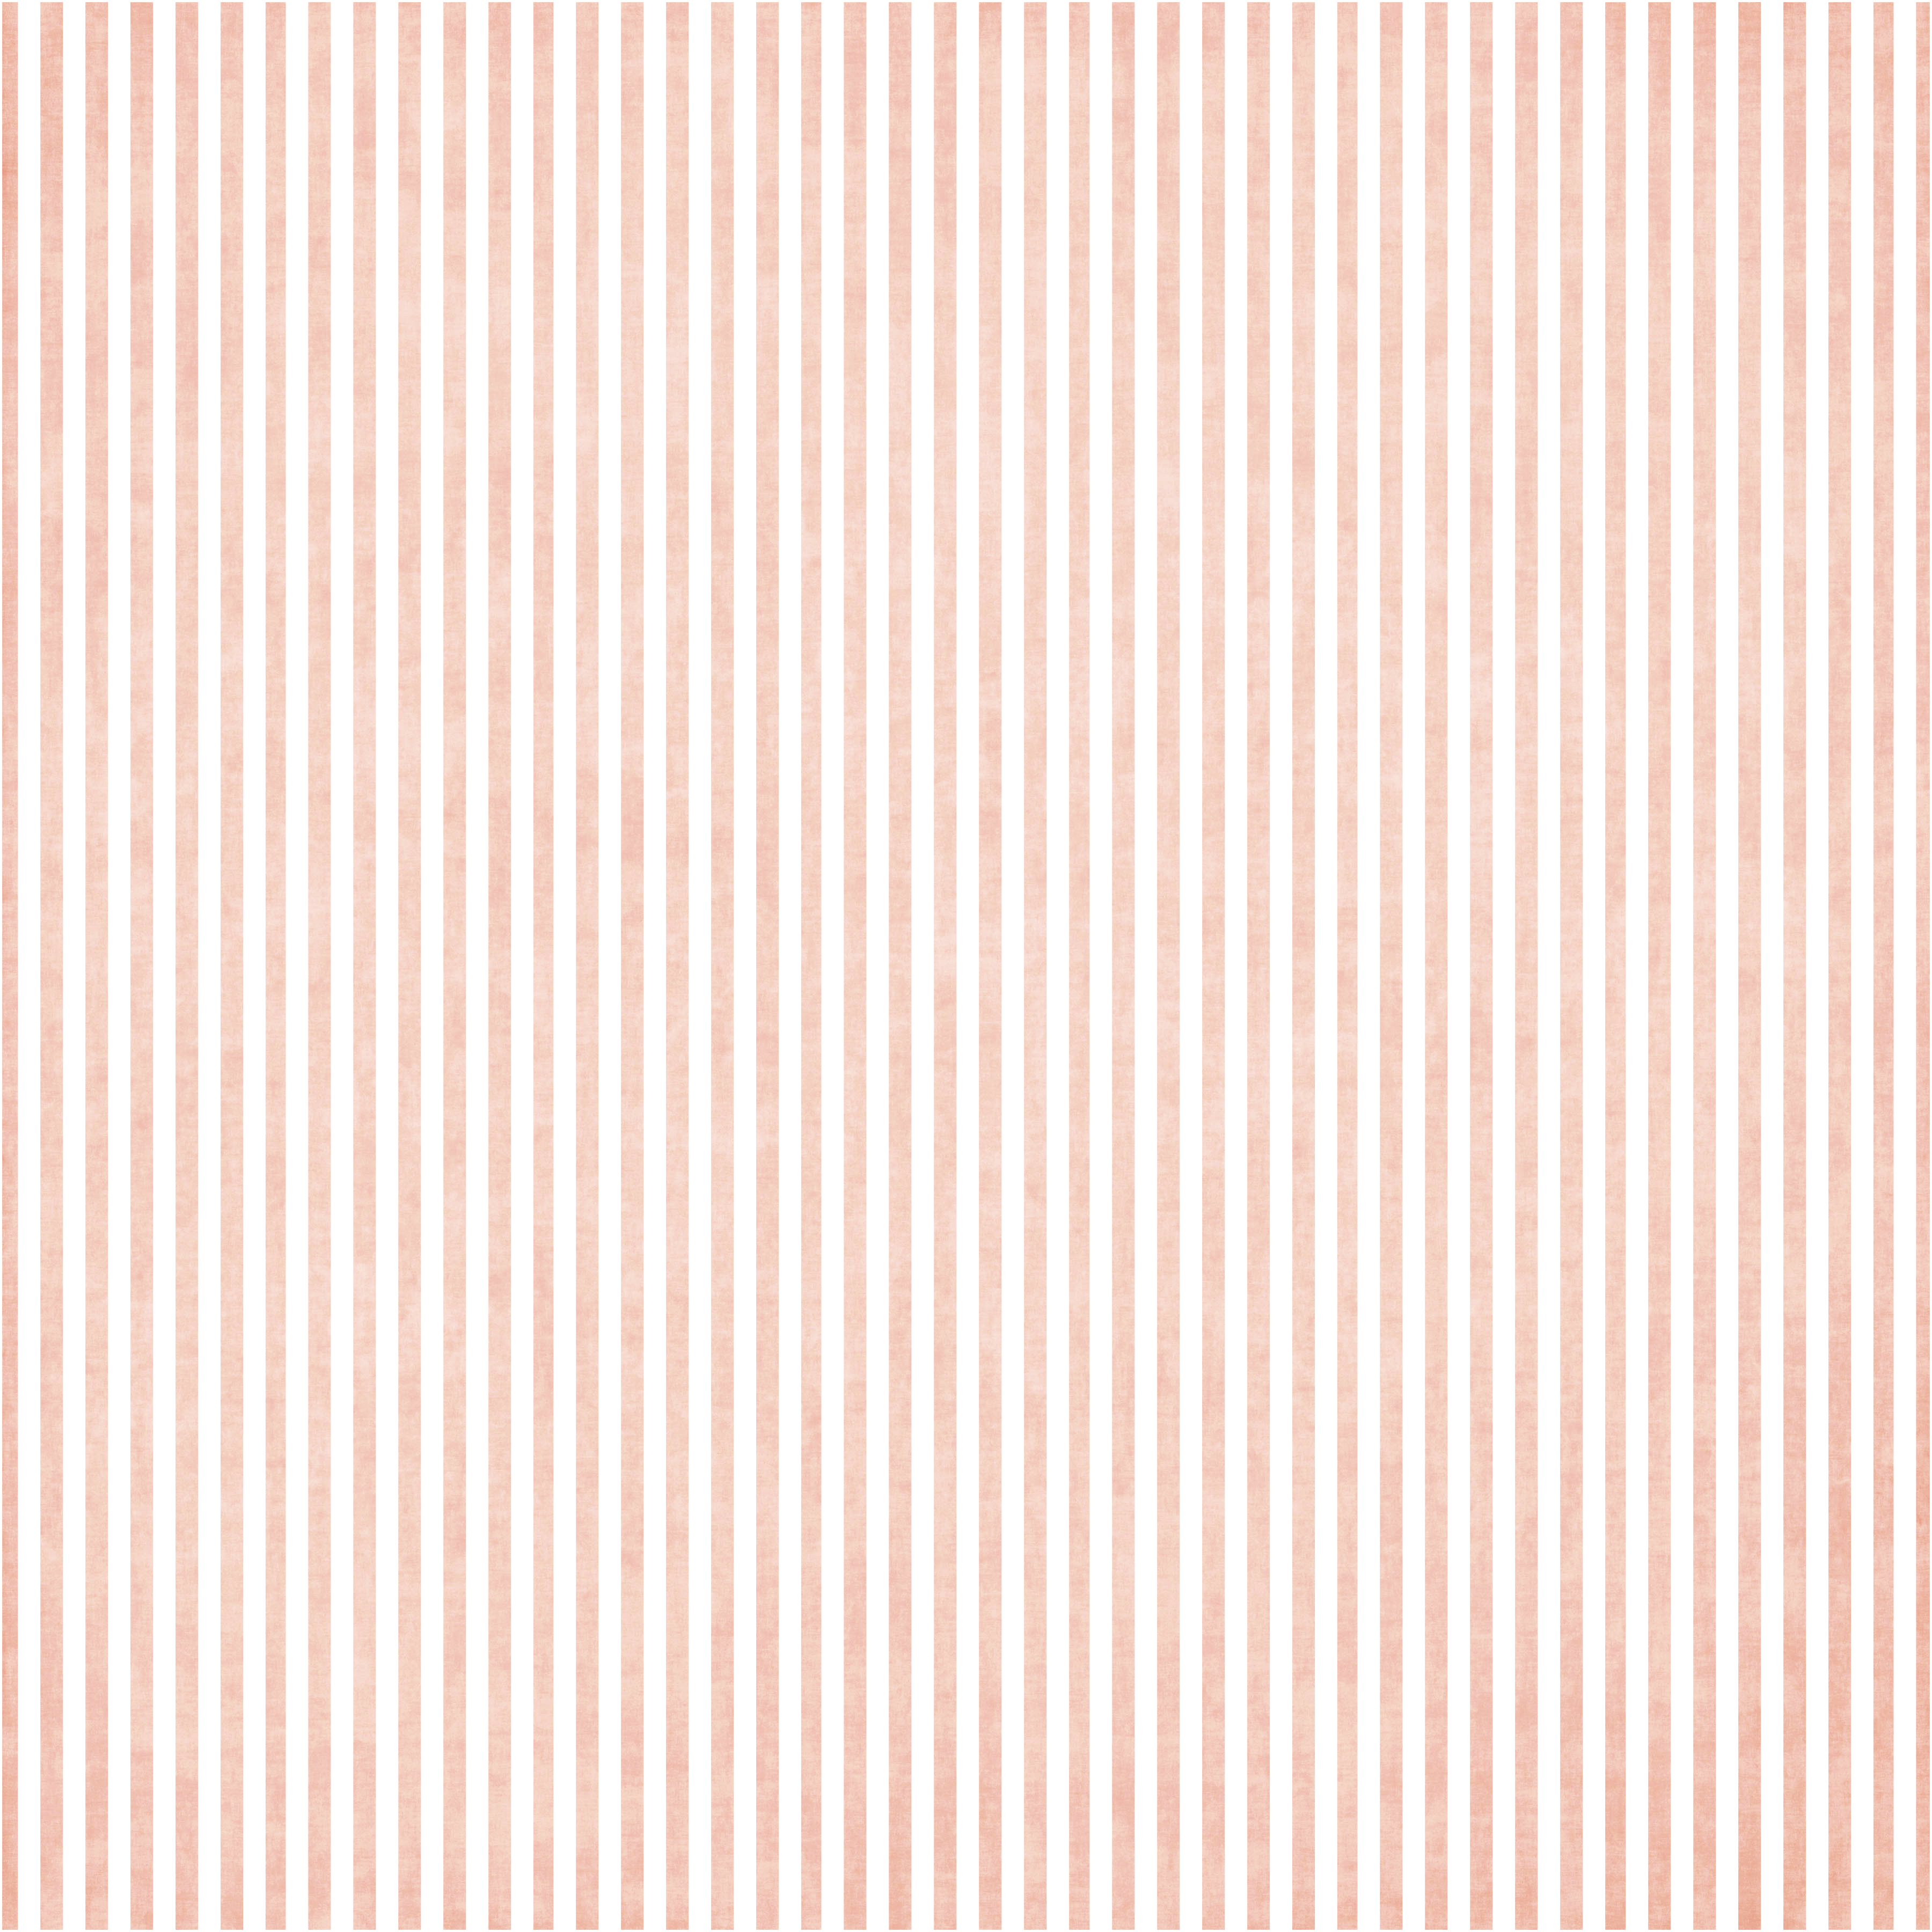 Red background pattern photo